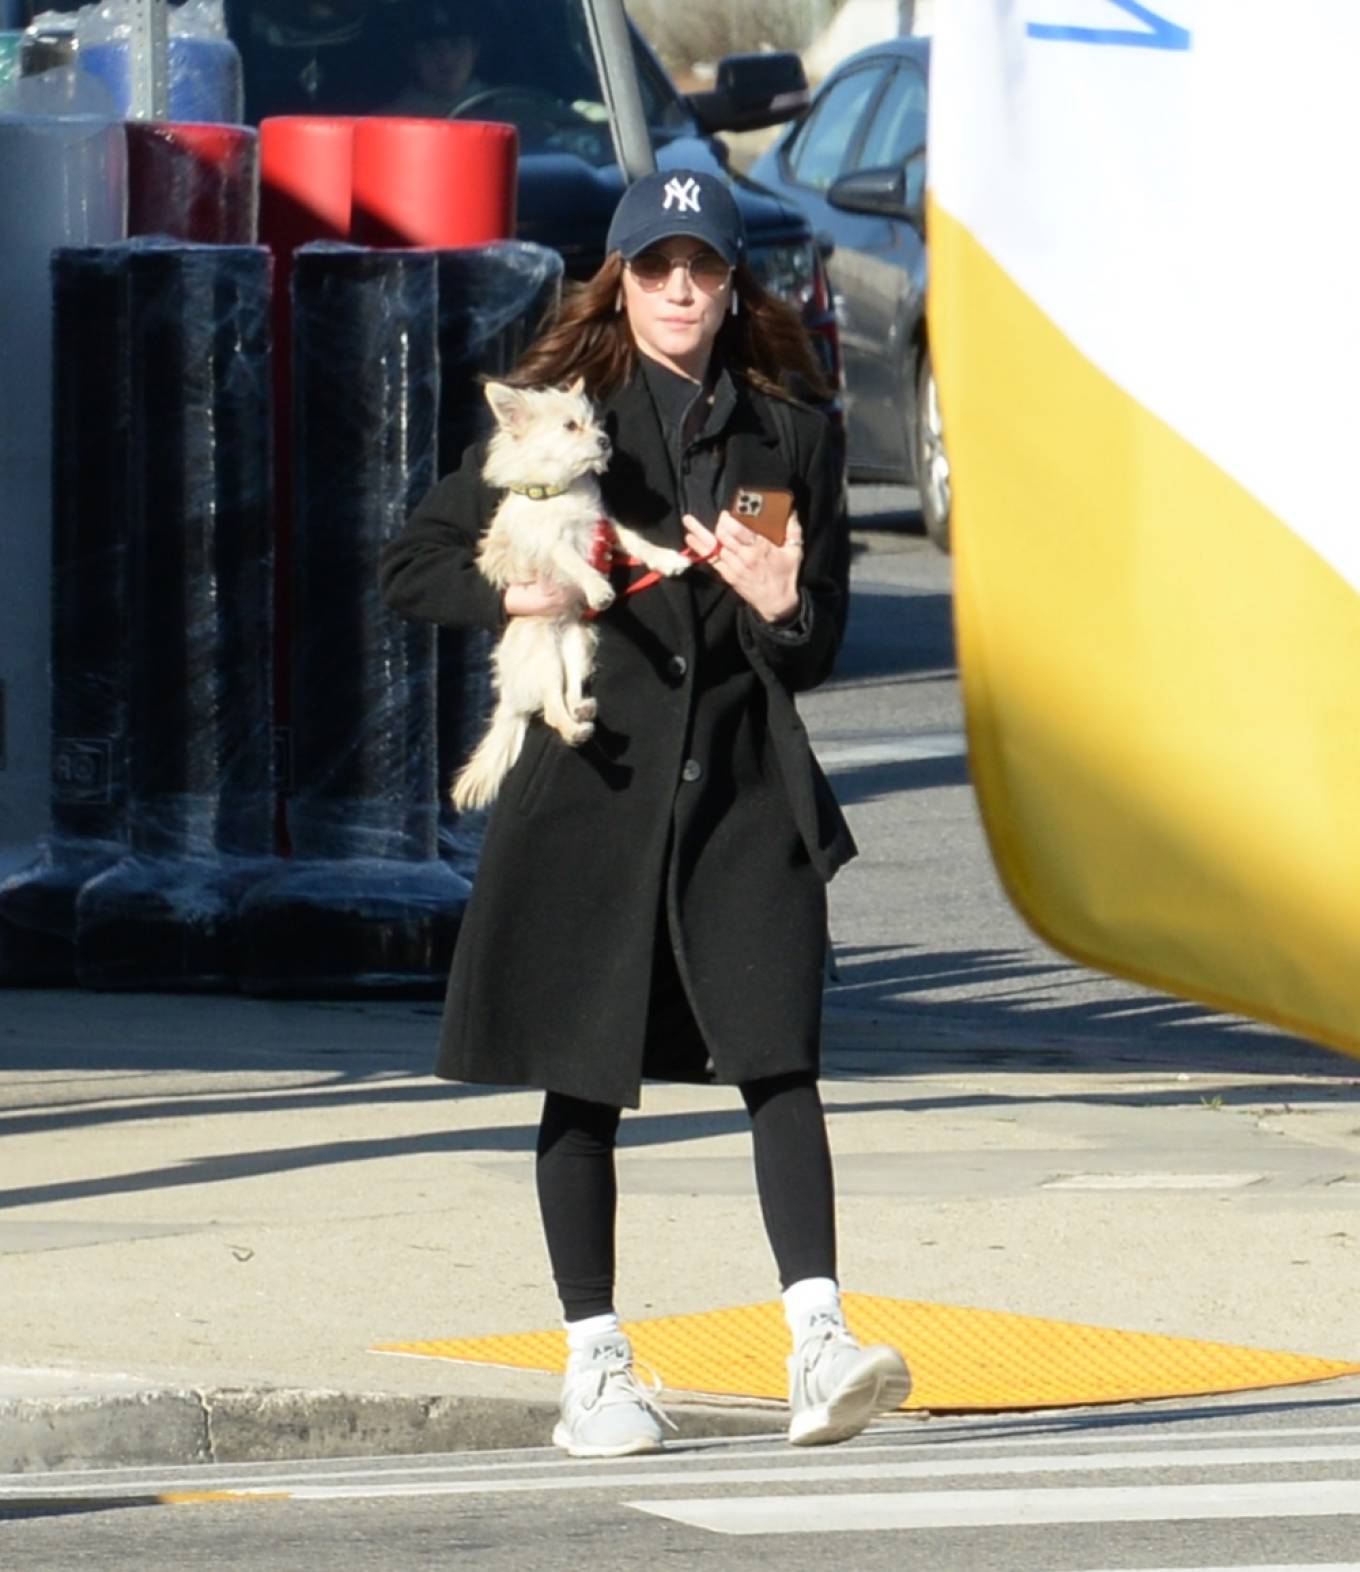 Brittany Snow - Taking a walk with her dog in Los Angeles